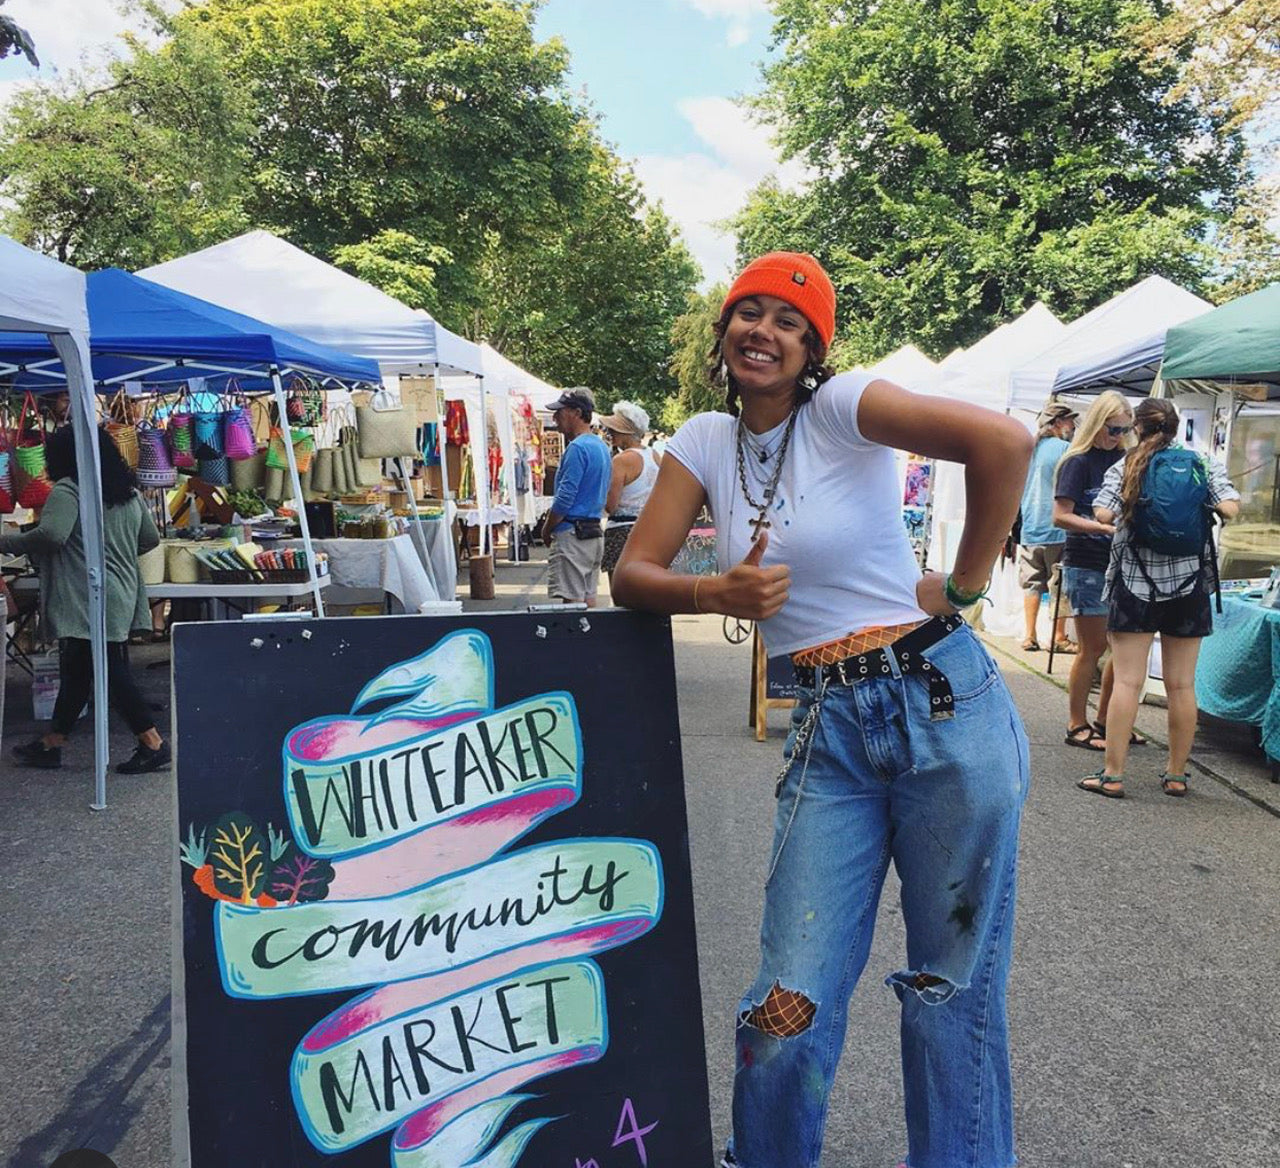 The Whiteaker Market and supporting BIPOC in our community